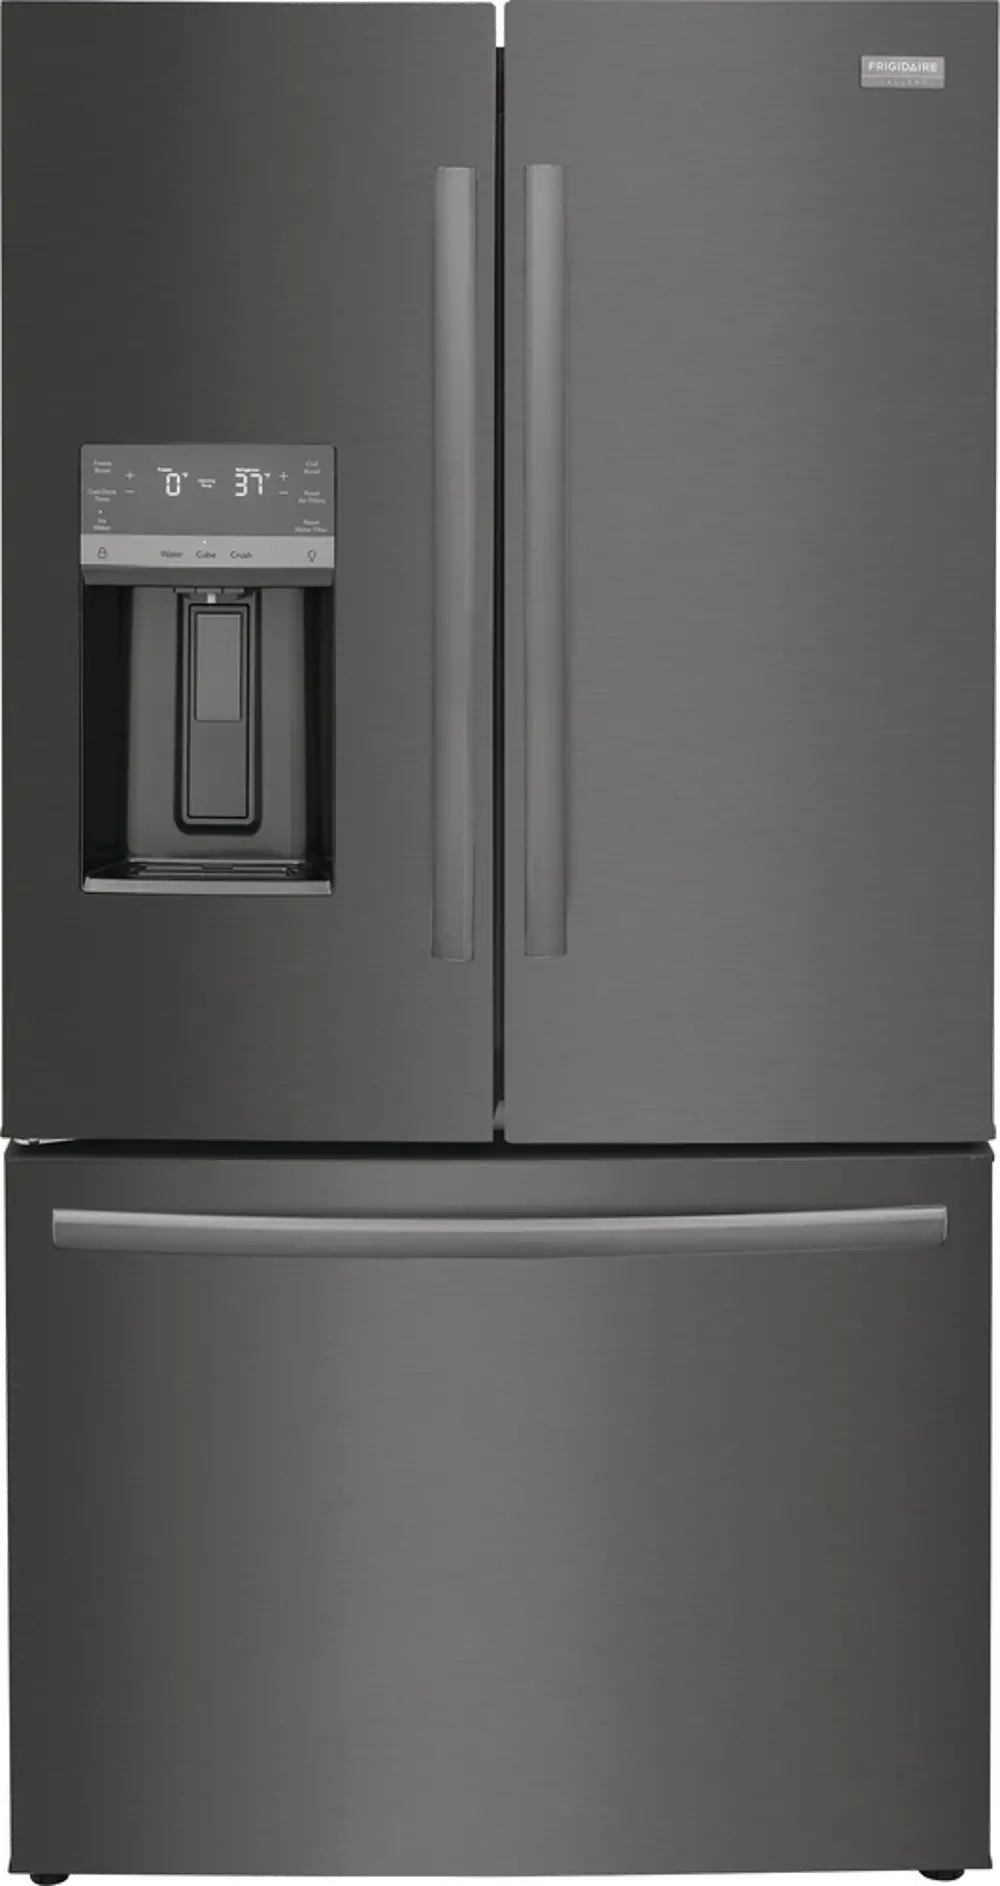 GRFC2353AD Frigidaire 22.6 cu ft French Door Refrigerator - Counter Depth Black Stainless Steel-1